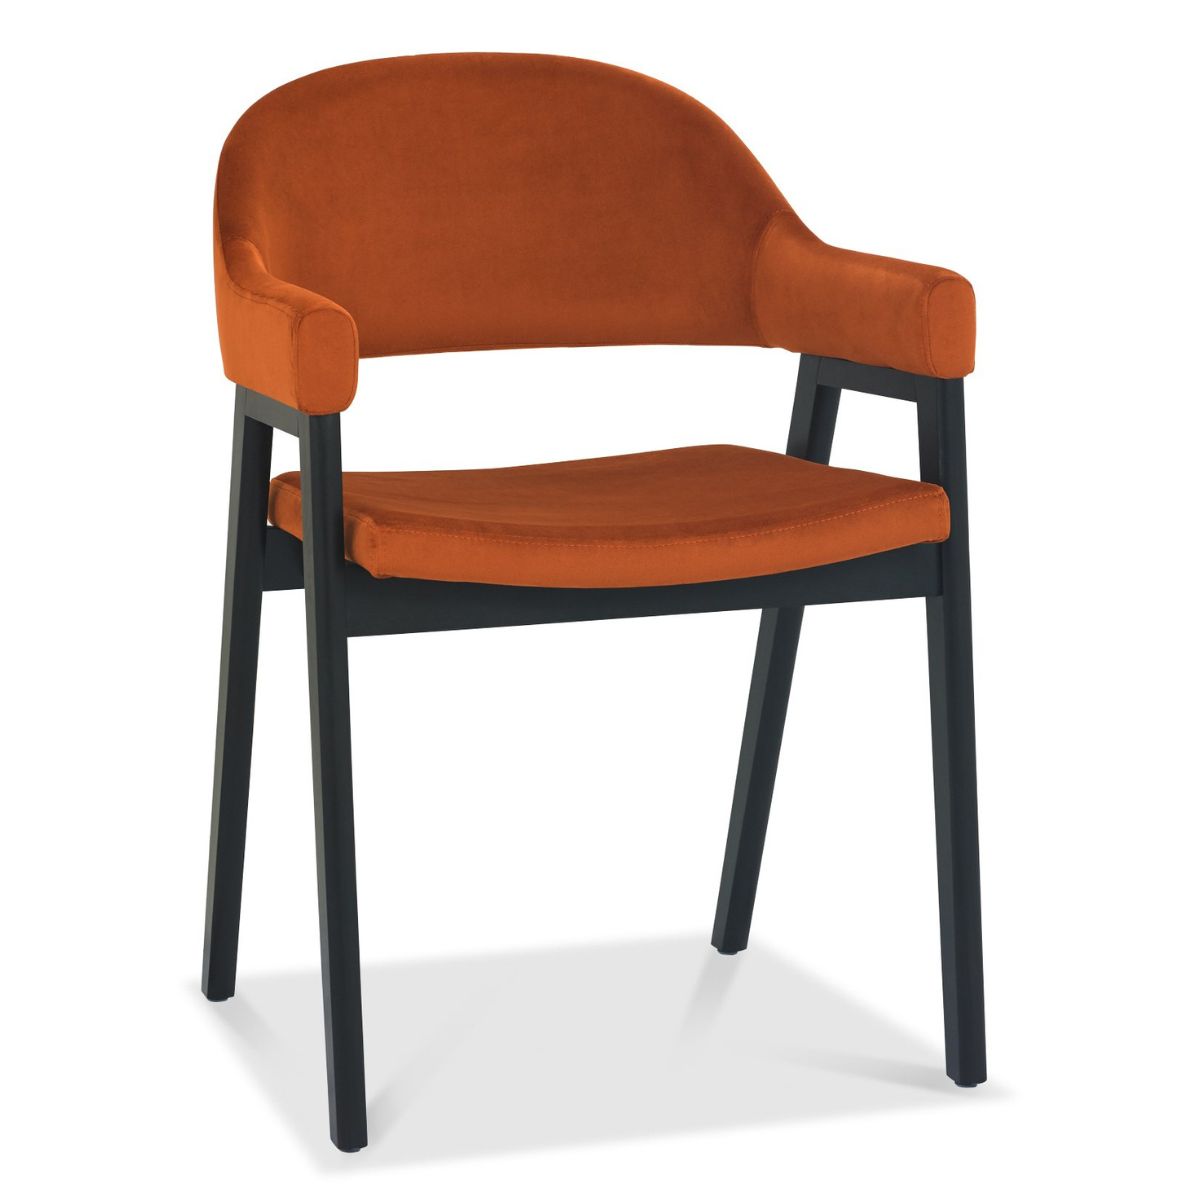 Chambery Weathered Oak Curved Back Dining Chair Orange - 1